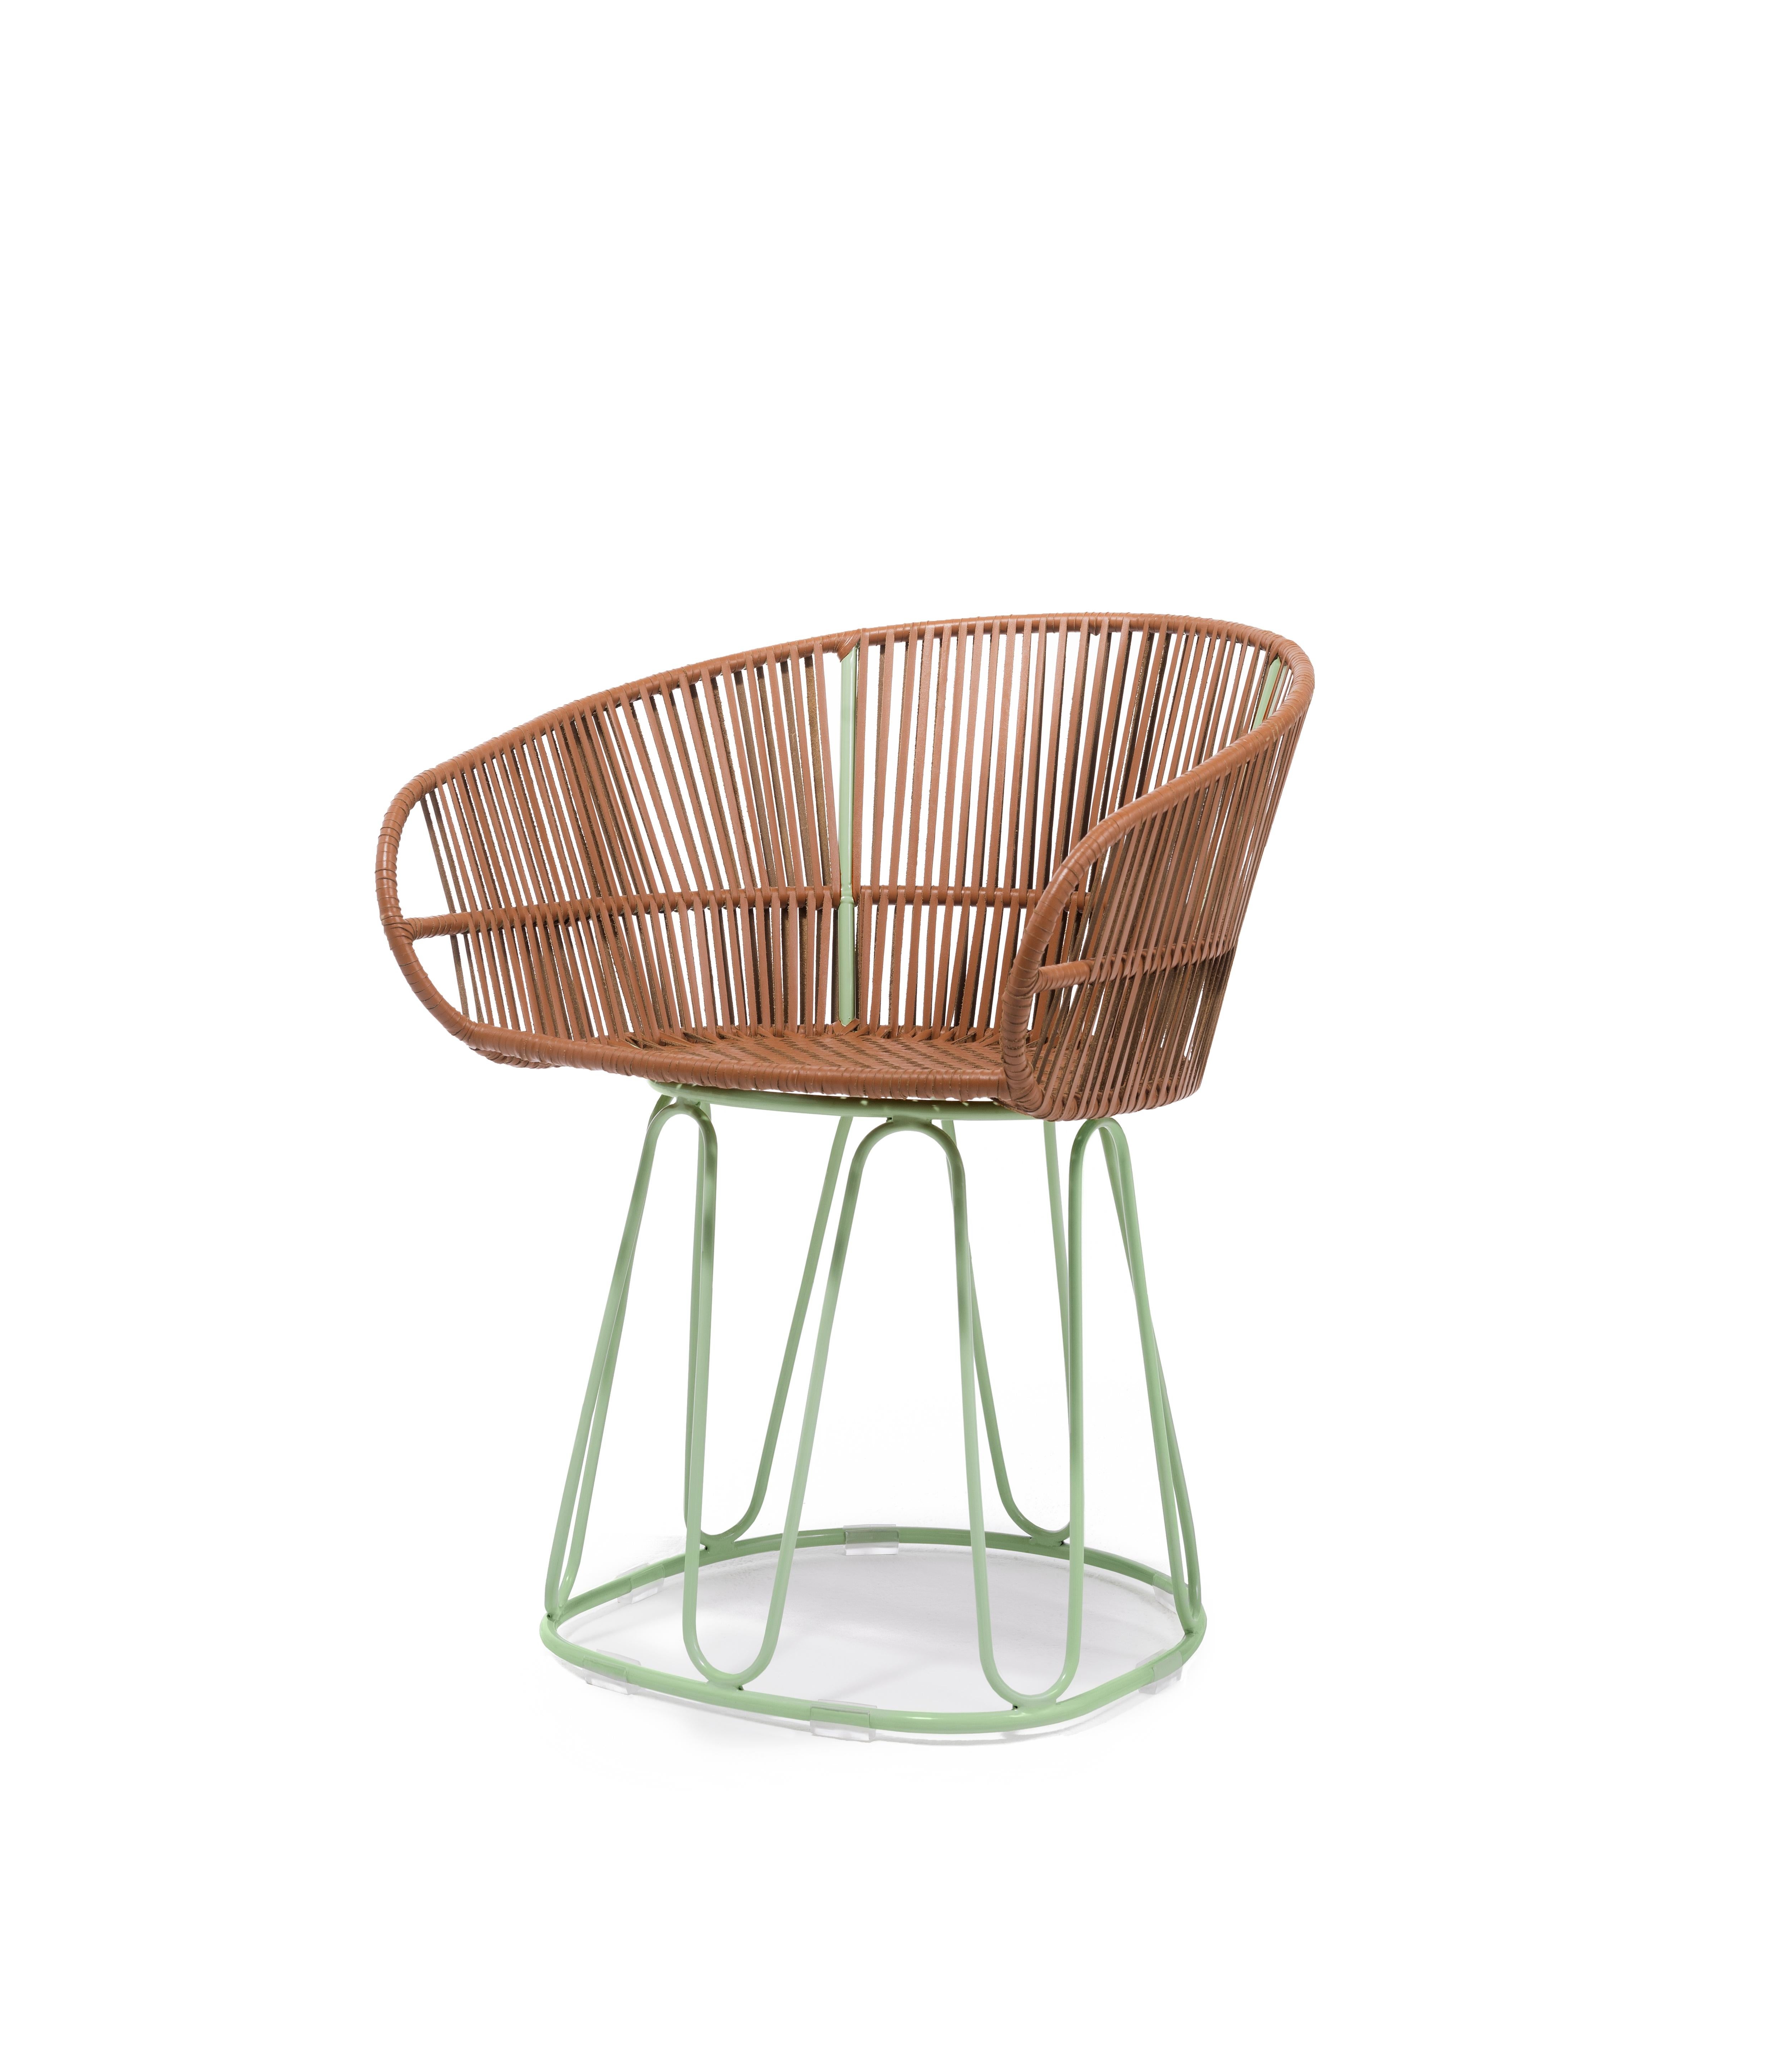 Circo dining chair leather by Sebastian Herkner
Materials: Galvanized and powder-coated tubular steel. Leather. 
Technique: Weaved by local craftspeople in Colombia. 
Dimensions: W 61.5 x D 56.5 x H 77.5 cm
Available in colors: cognac/ menta,